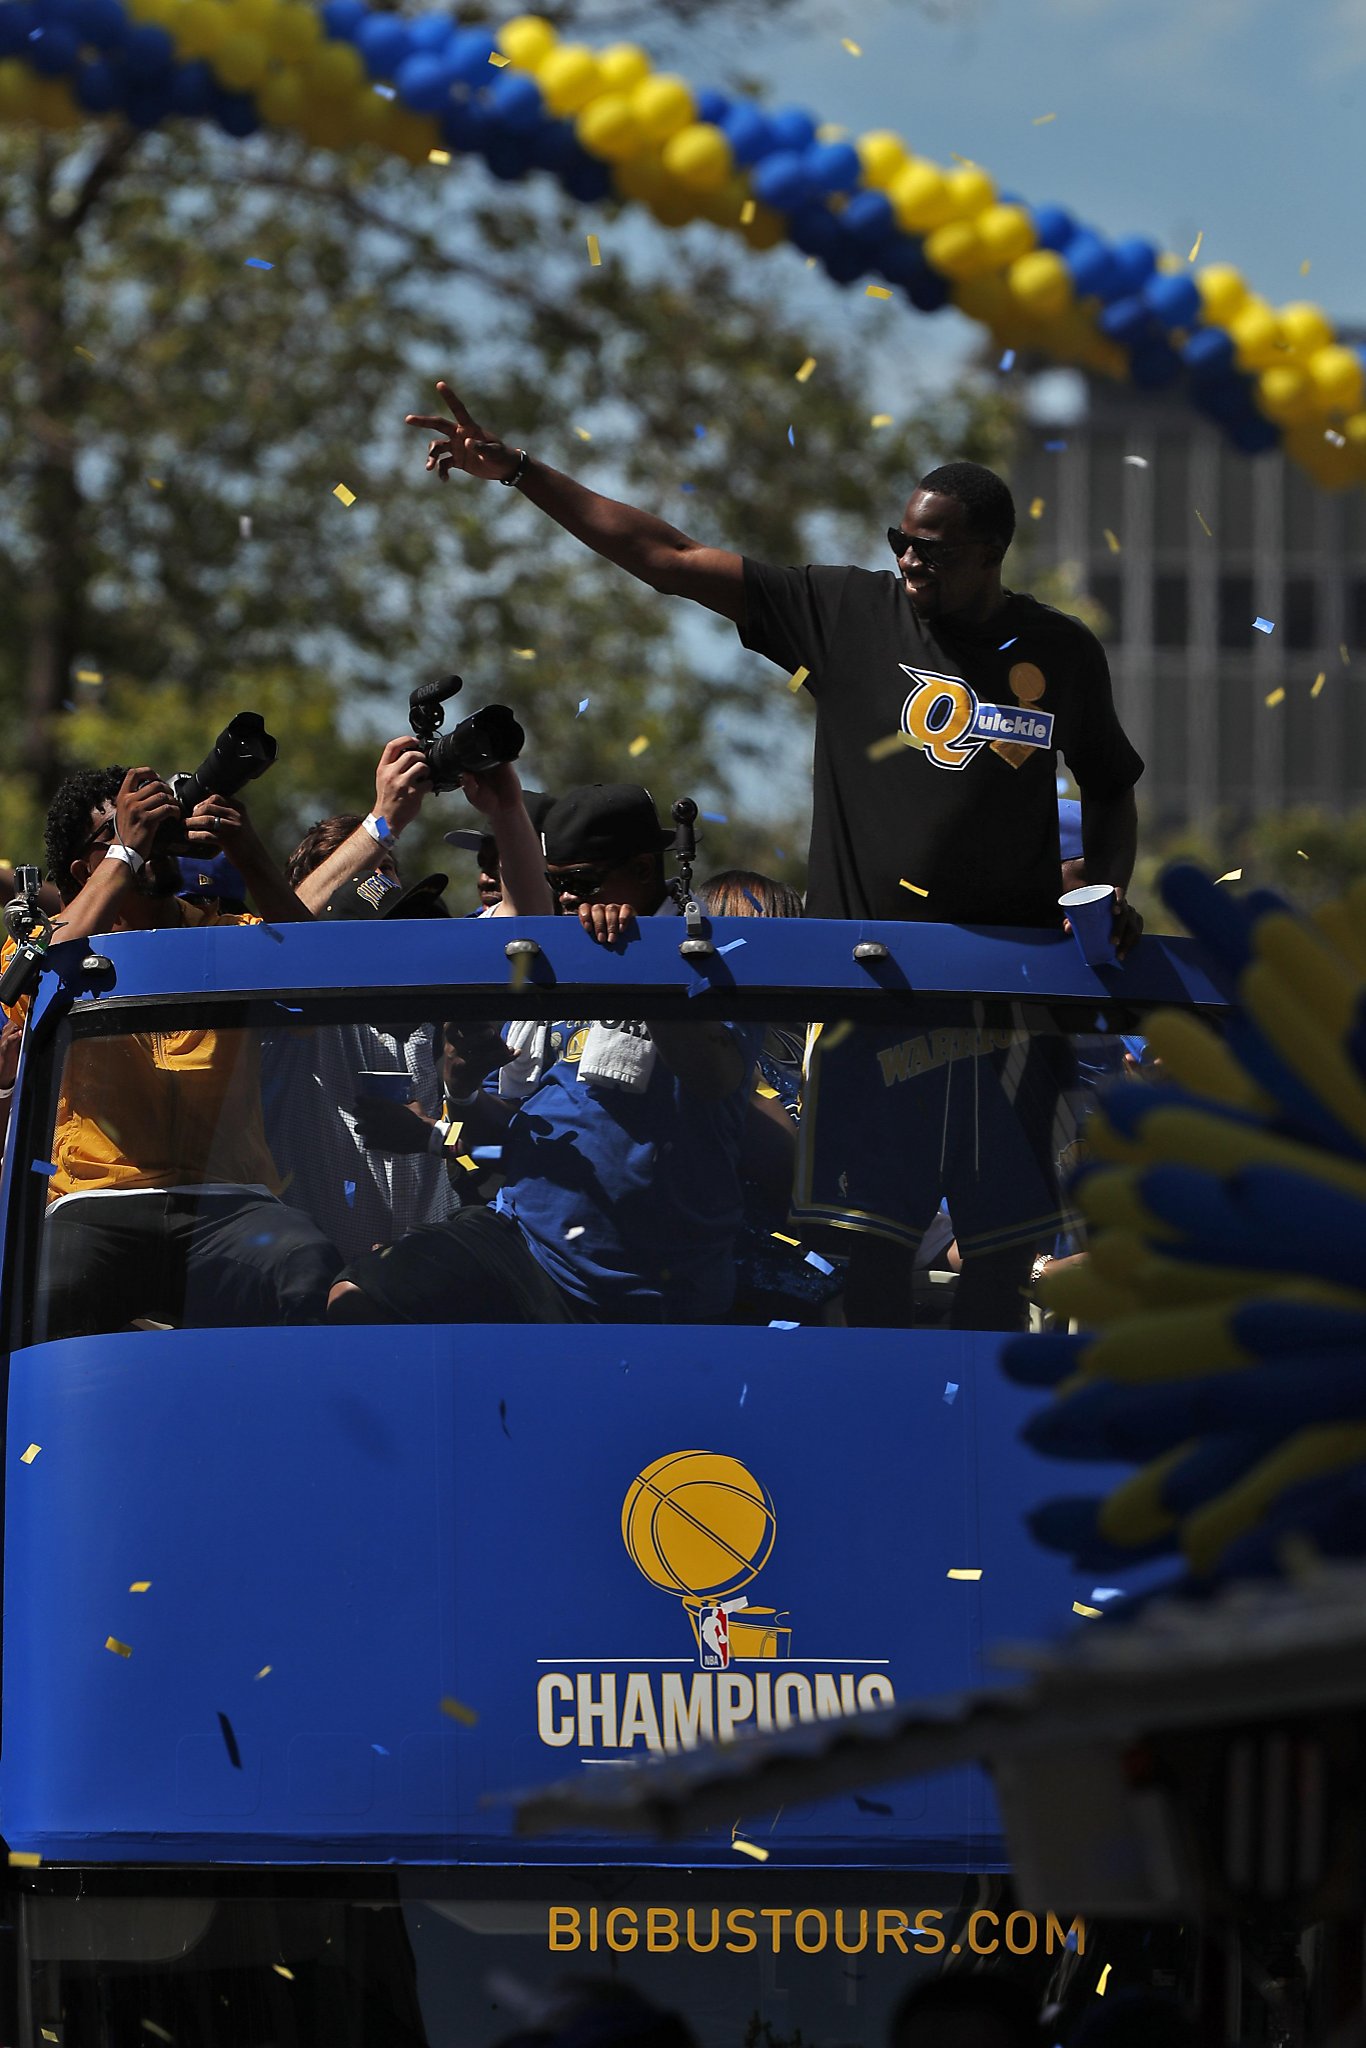 Draymond trolls the Cavs with his parade T-shirt, sparking a